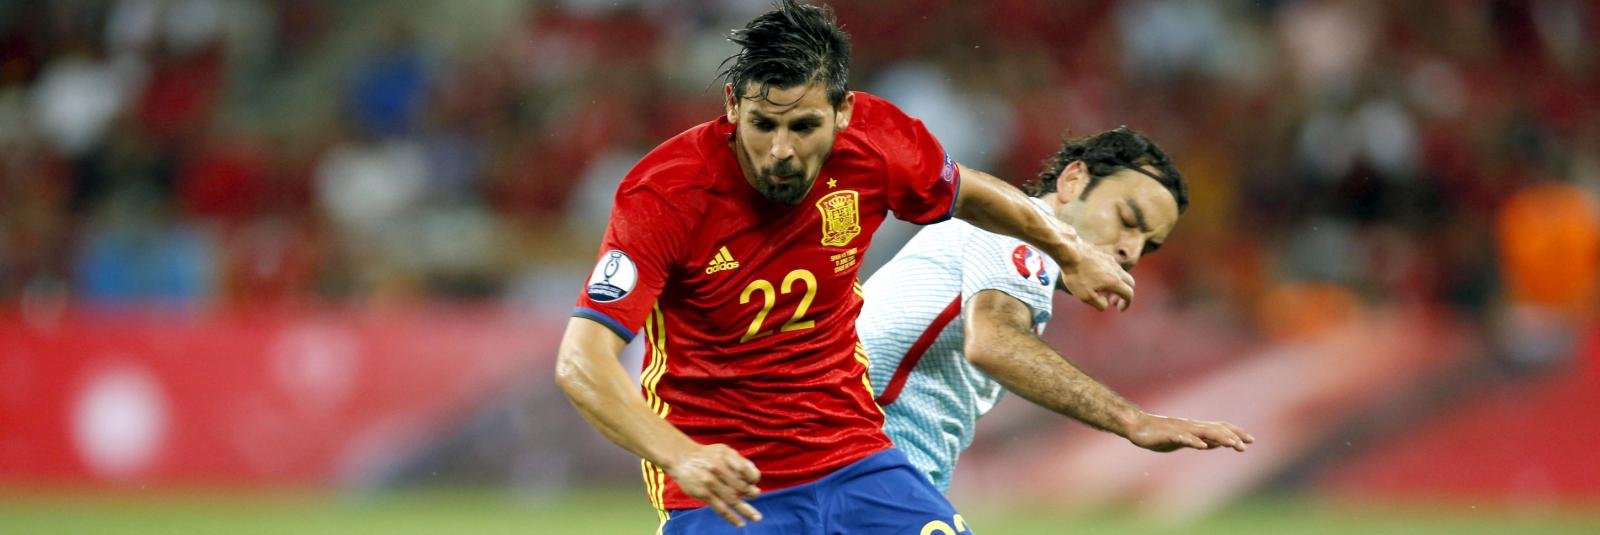 Manchester City sign Spain forward Nolito for £13.8m